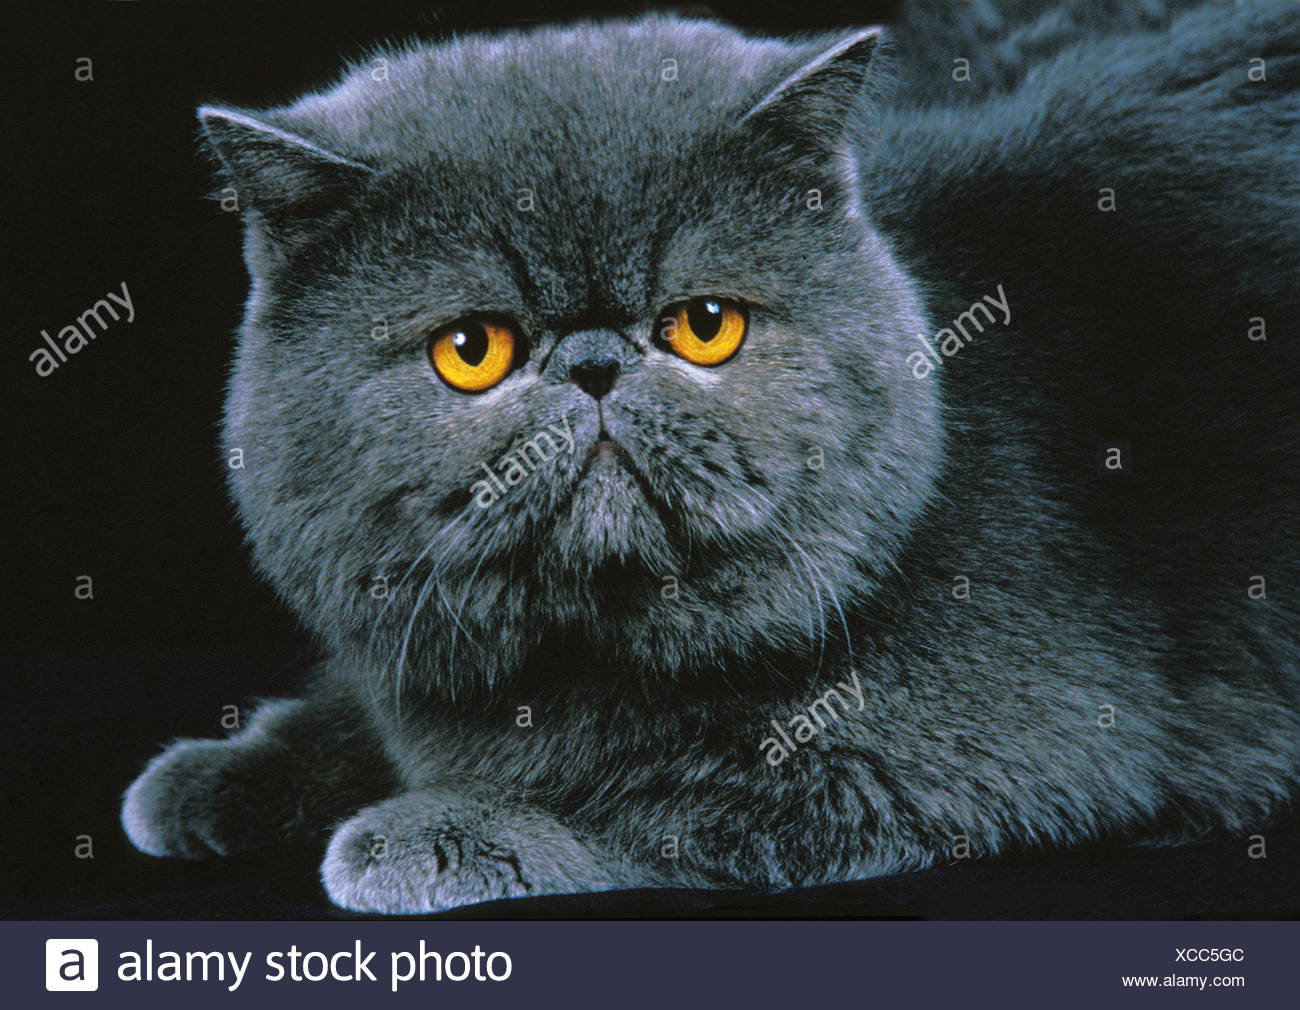 Exotic Shorthair Domestic Cat Adult Against Black Background Stock Photo Alamy